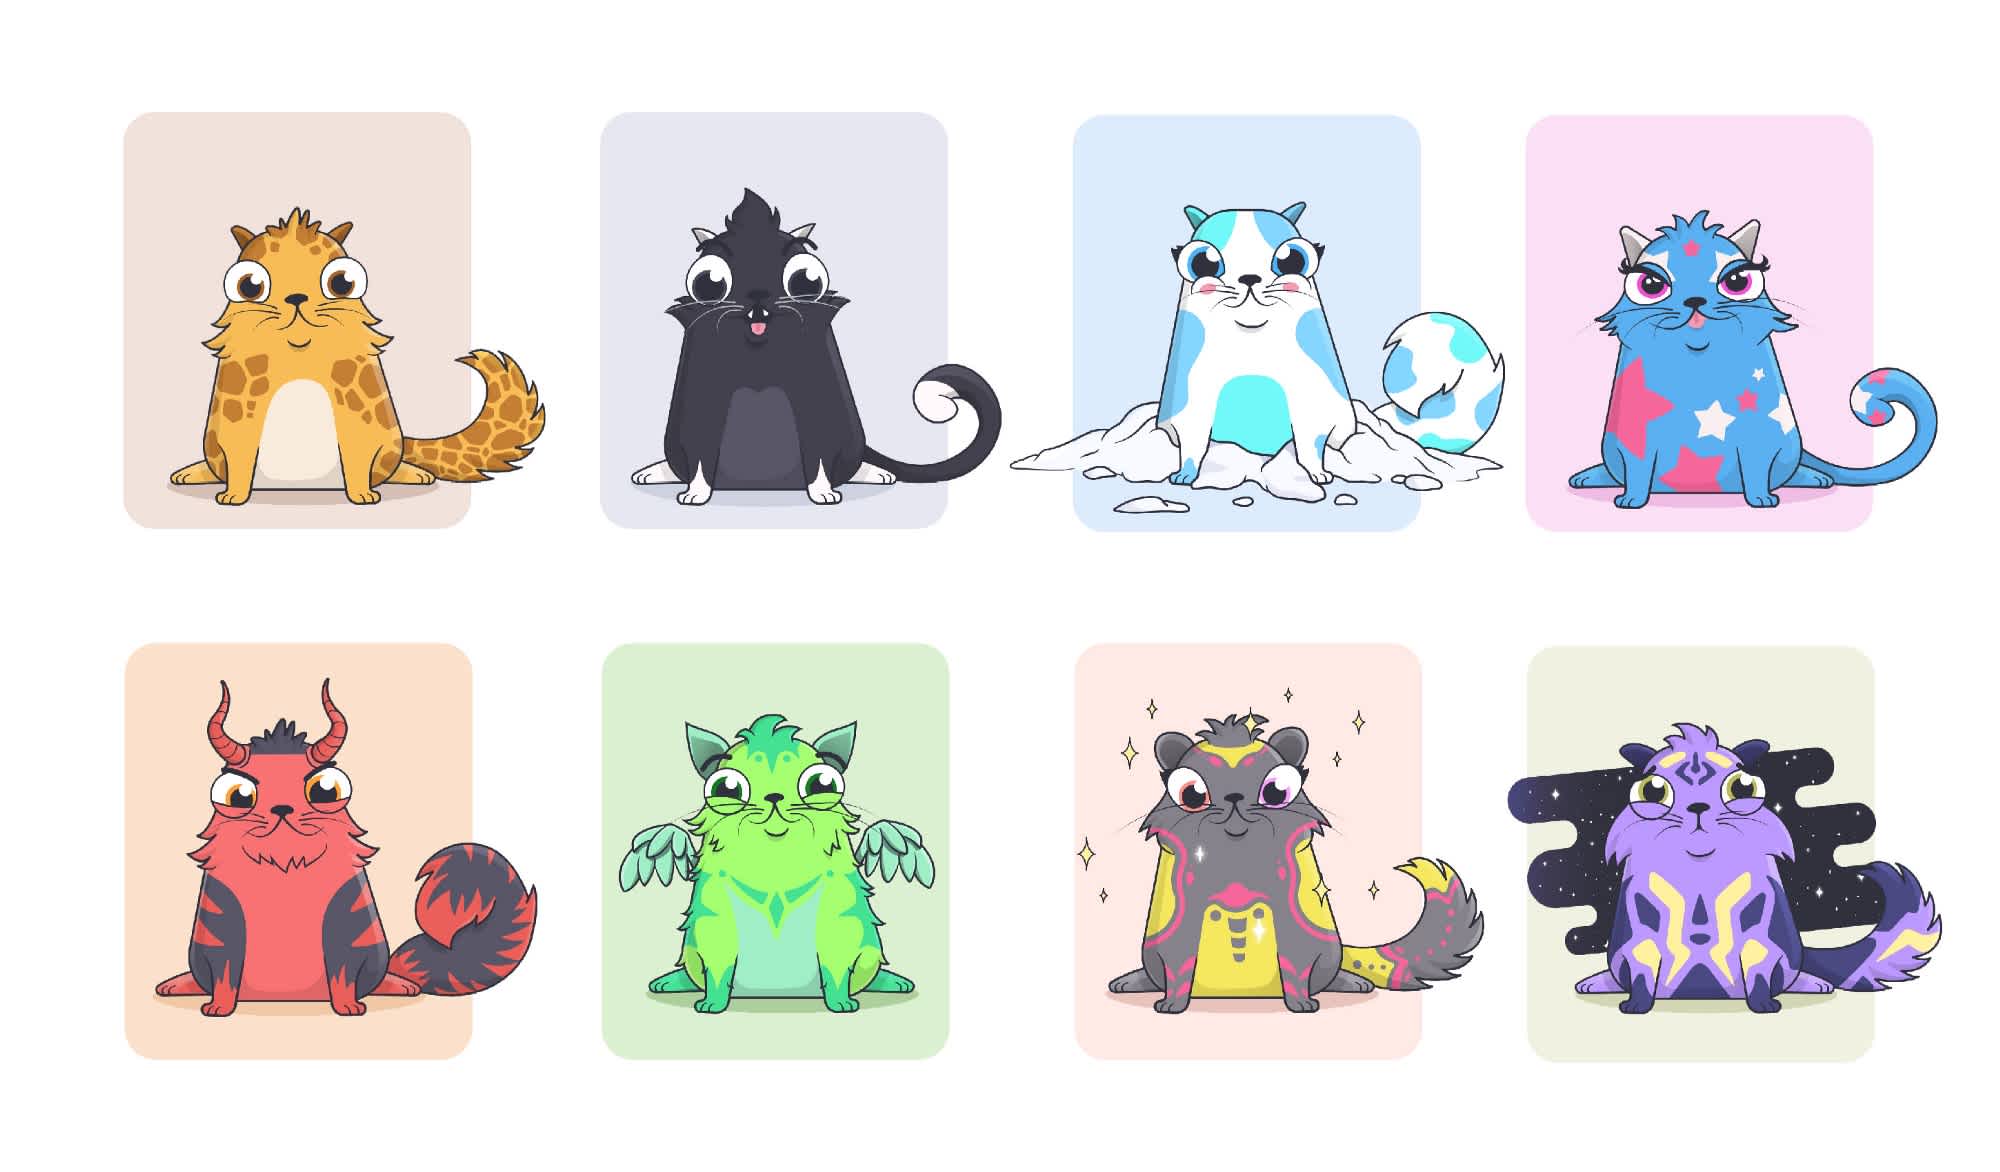 Will you be the first to breed these imaginary CryptoKitties? -  CryptoKitties Blog